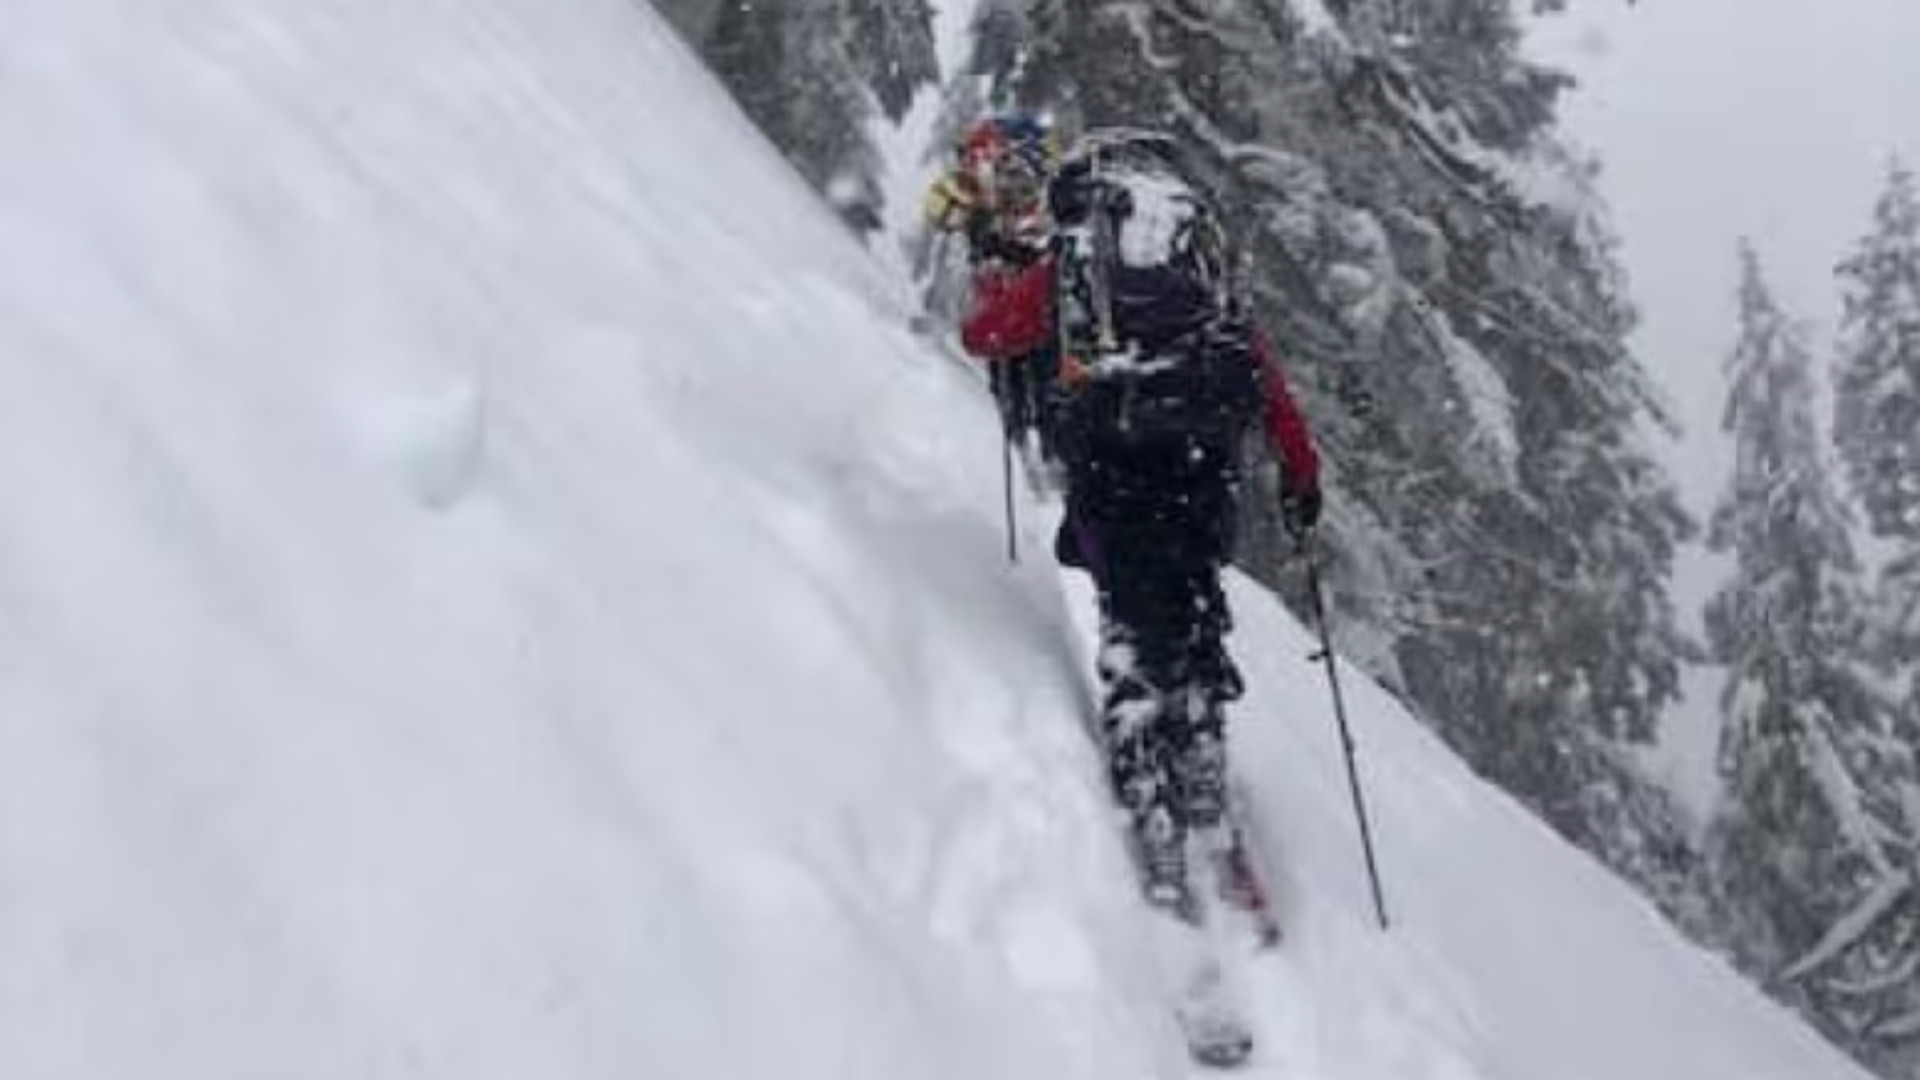 Search teams respond to help rescue 9 skiers in southwest B.C.